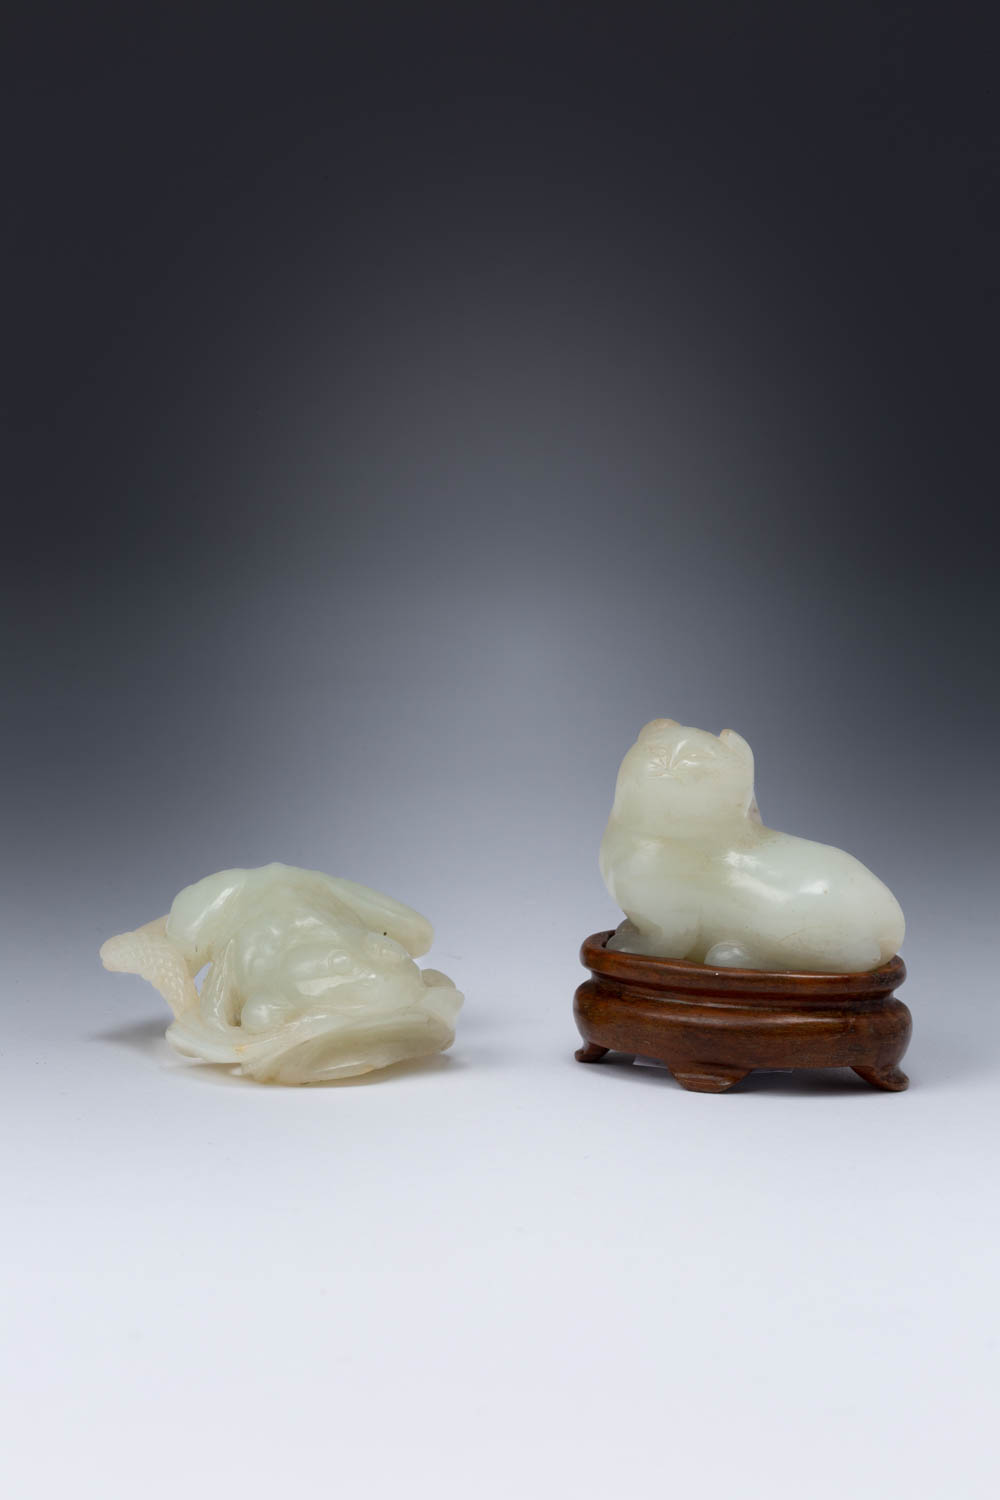 TWO CHINESE PALE CELADON JADE CARVINGS OF ANIMALS QING DYNASTY One a recumbent cat with its head